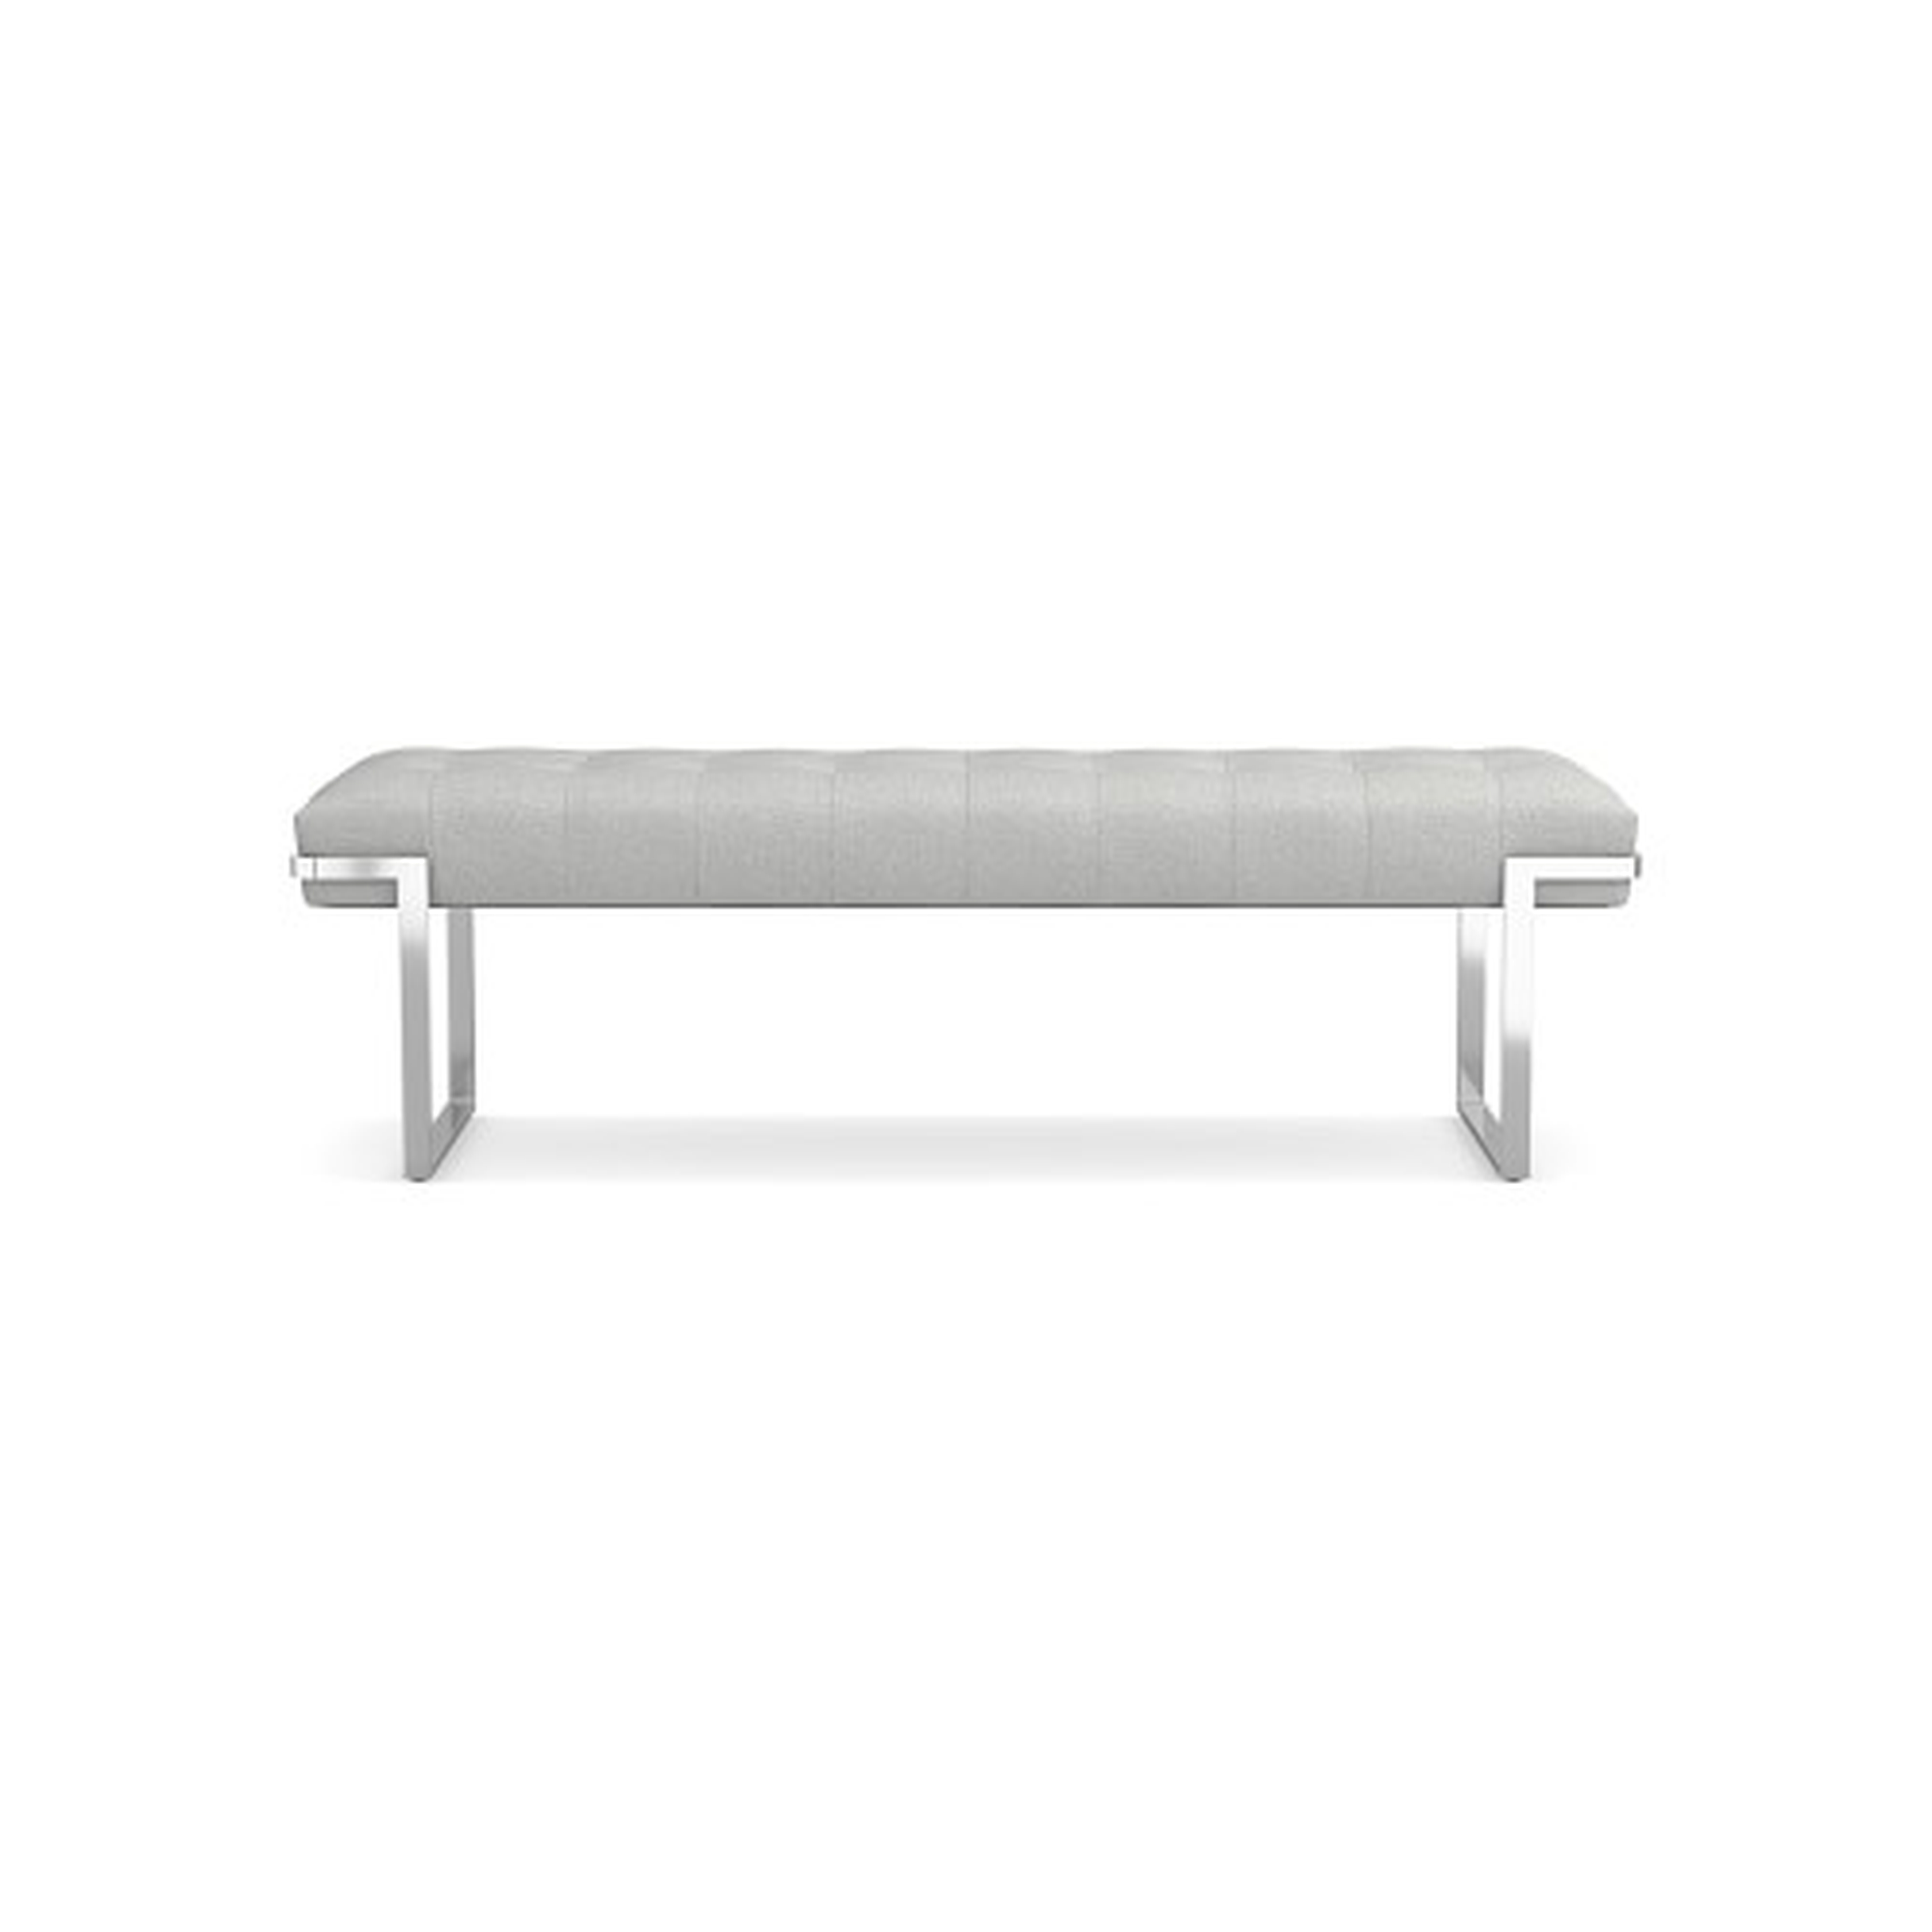 Mixed Material Bench, Standard Cushion, Perennials Performance Basketweave, Light Grey, Polished Nickel - Williams Sonoma